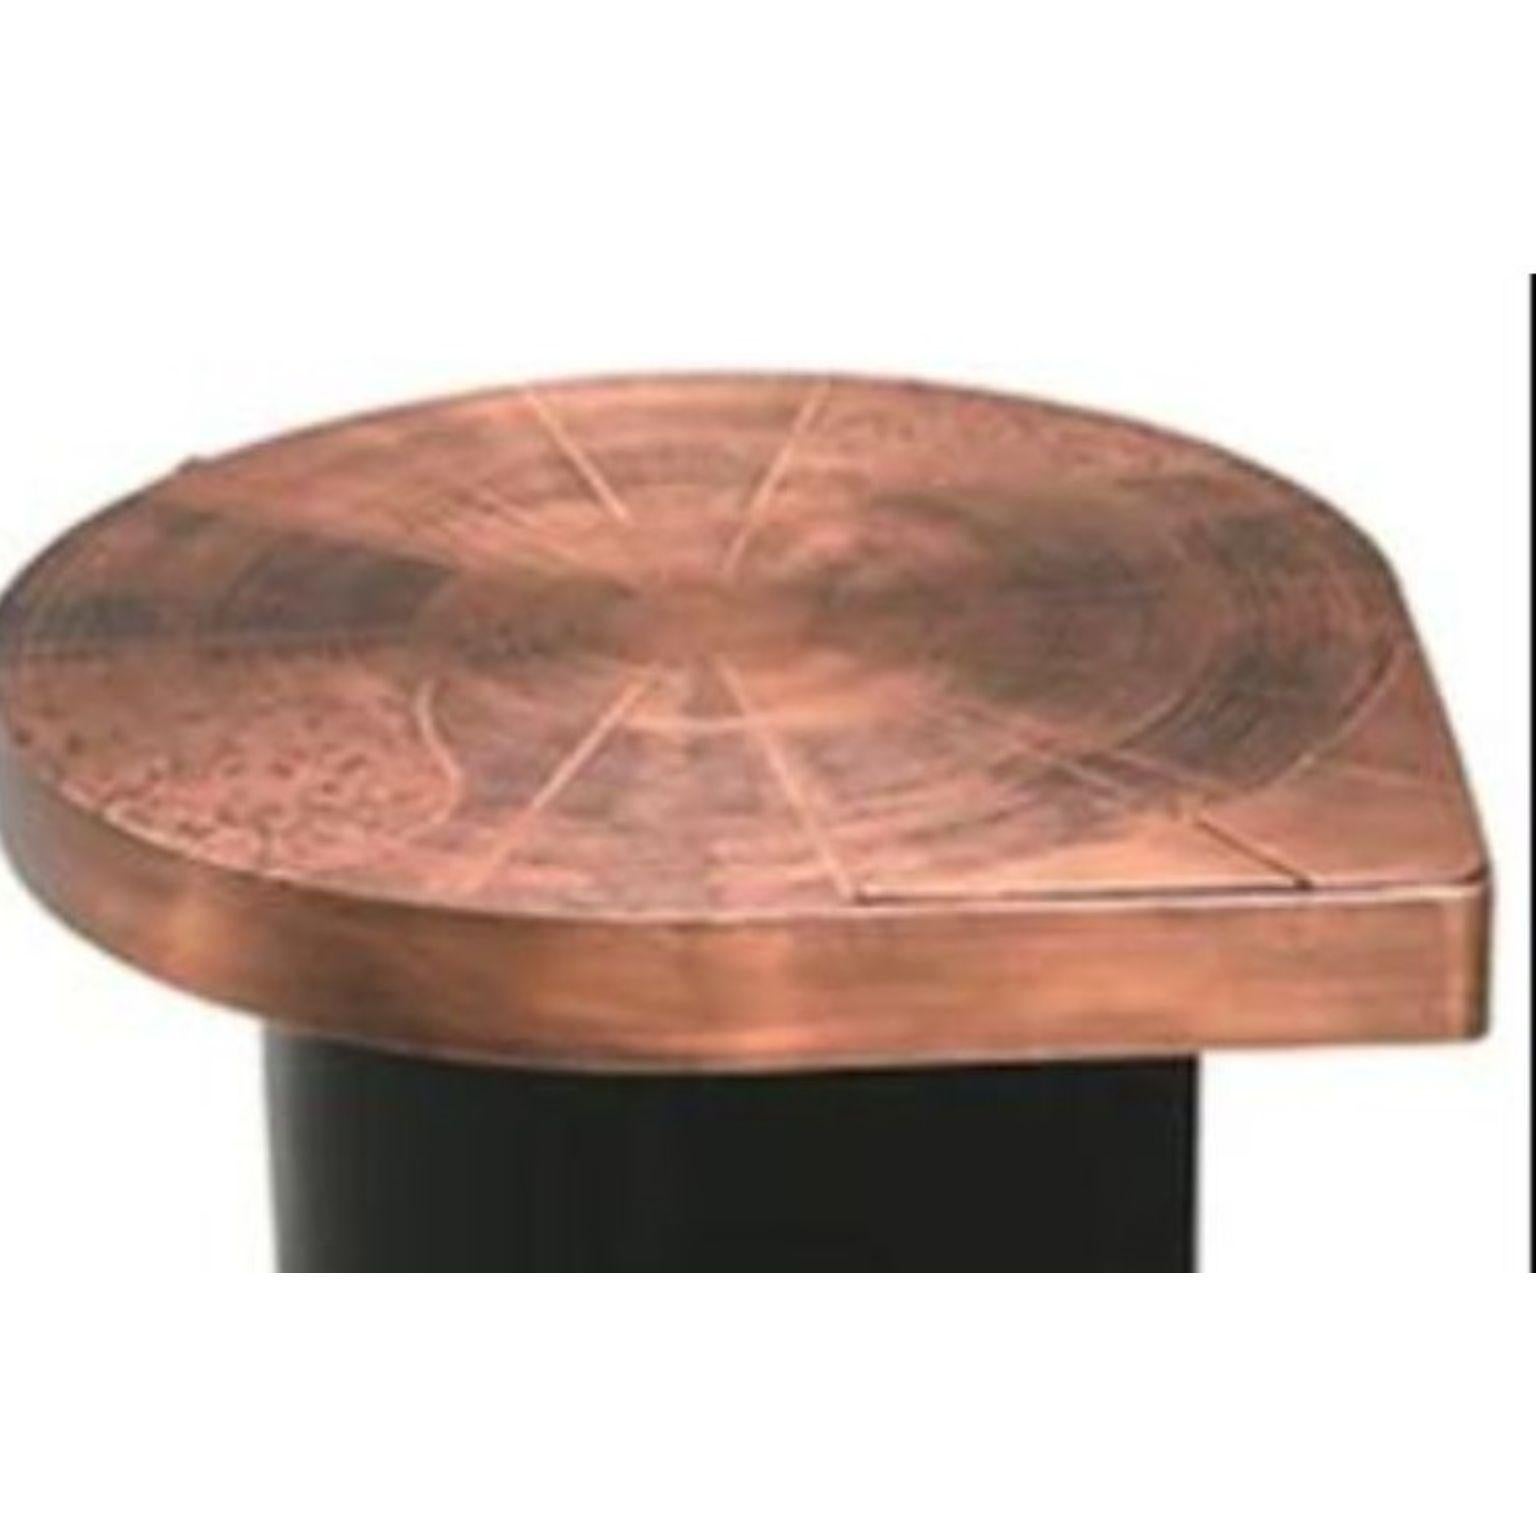 Teardrops Copper Coffee Table by Brutalist Be
One Of A Kind
Dimensions: Ø 40 x W 48 x H 35 cm.
Materials: Copper.

Also available in brass and in matte, glossy or black-patinated finishes. Please contact us. 

Copper list detail on the bottom of the